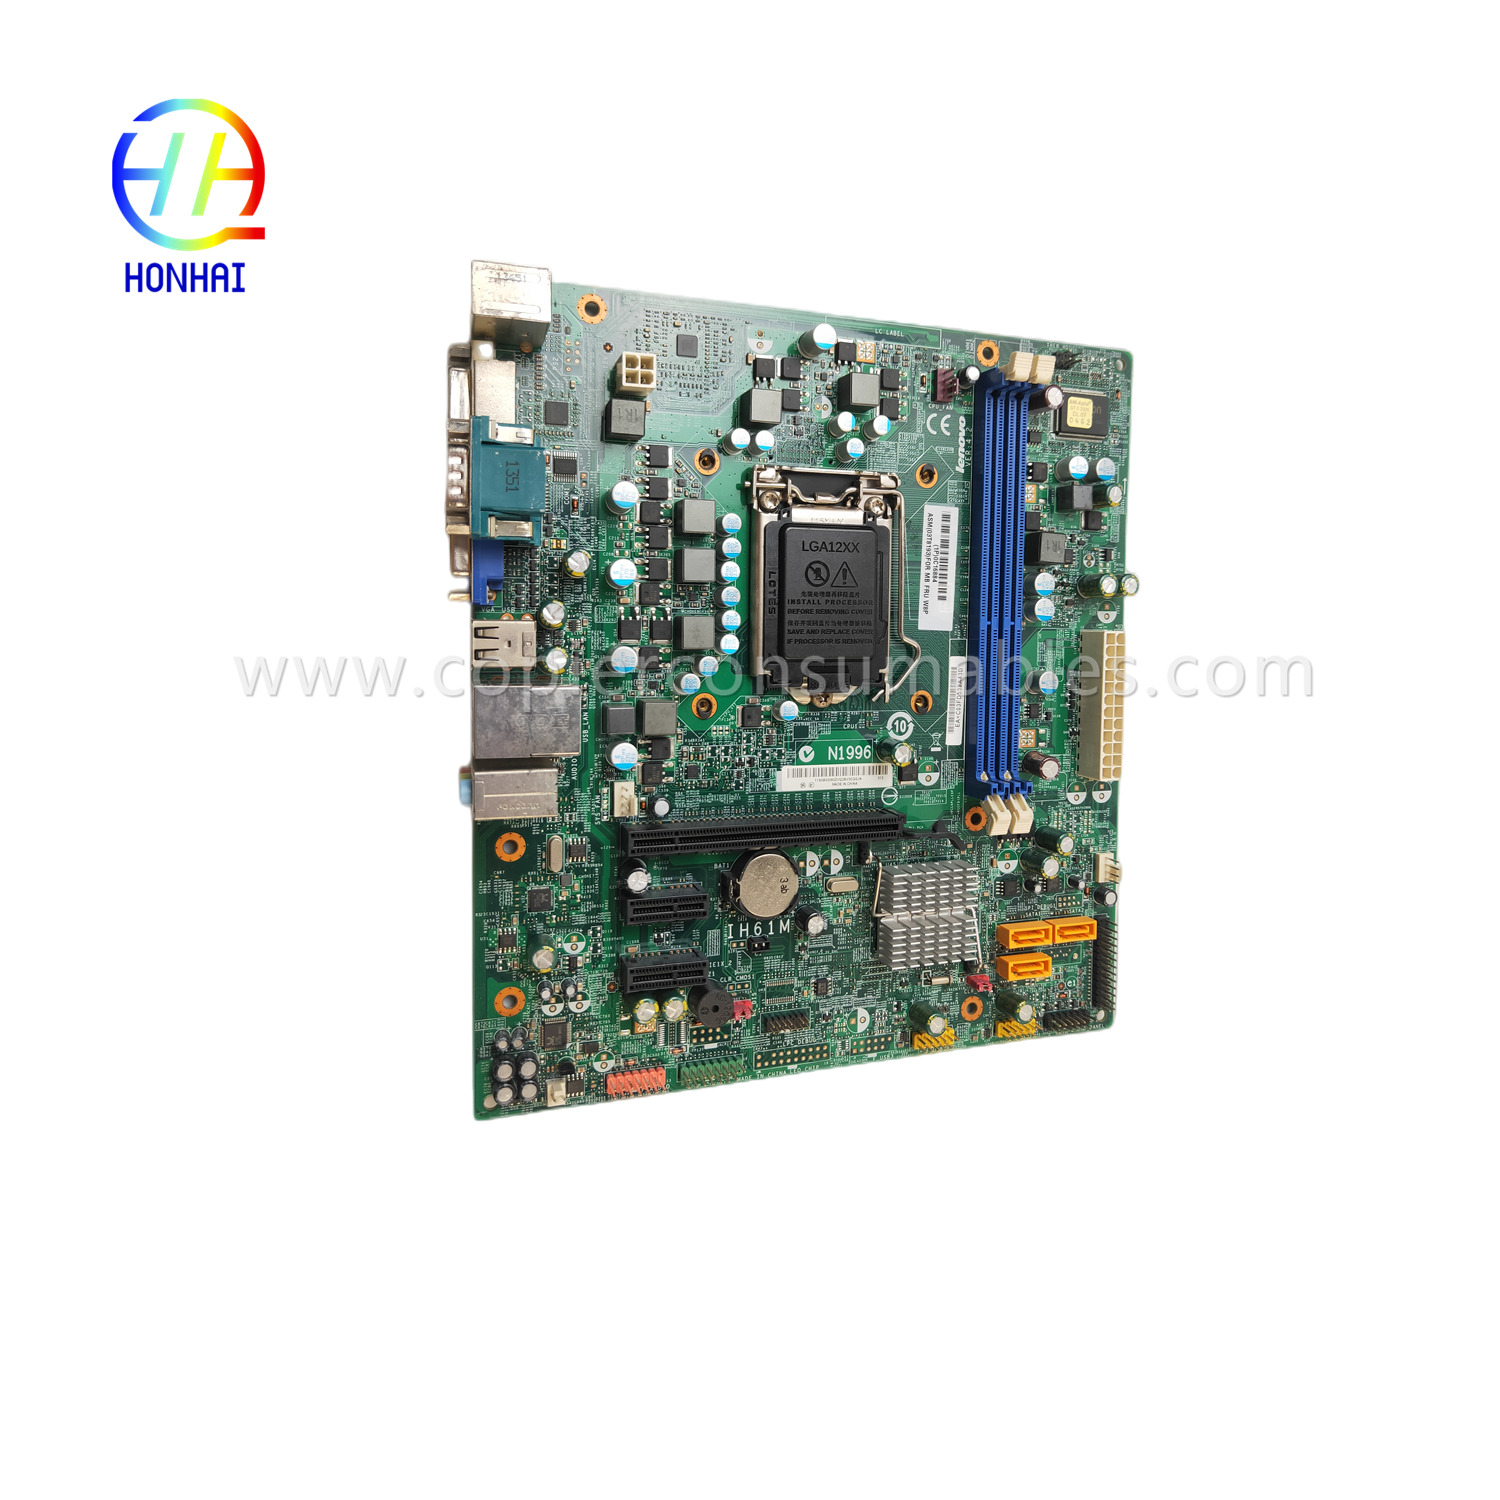 https://c585.goodao.net/ motherboard-for-lenovo-thinkcentre-m72e-lga-1155-03t8193-system-board-product/